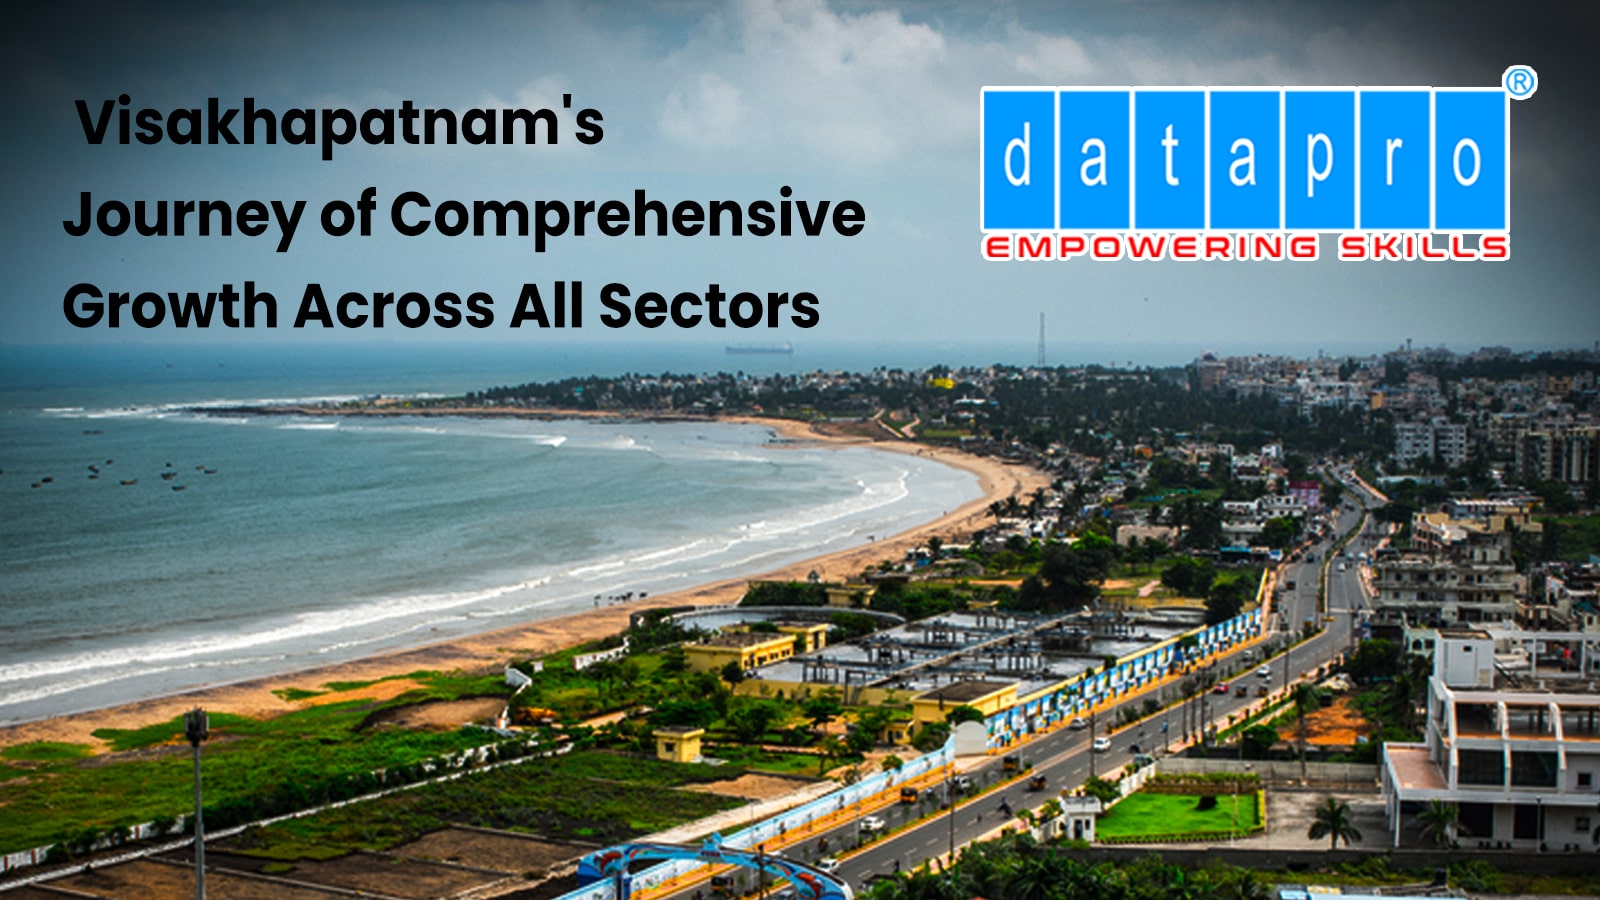 Visakhapatnam is witnessing comprehensive growth across all sectors!